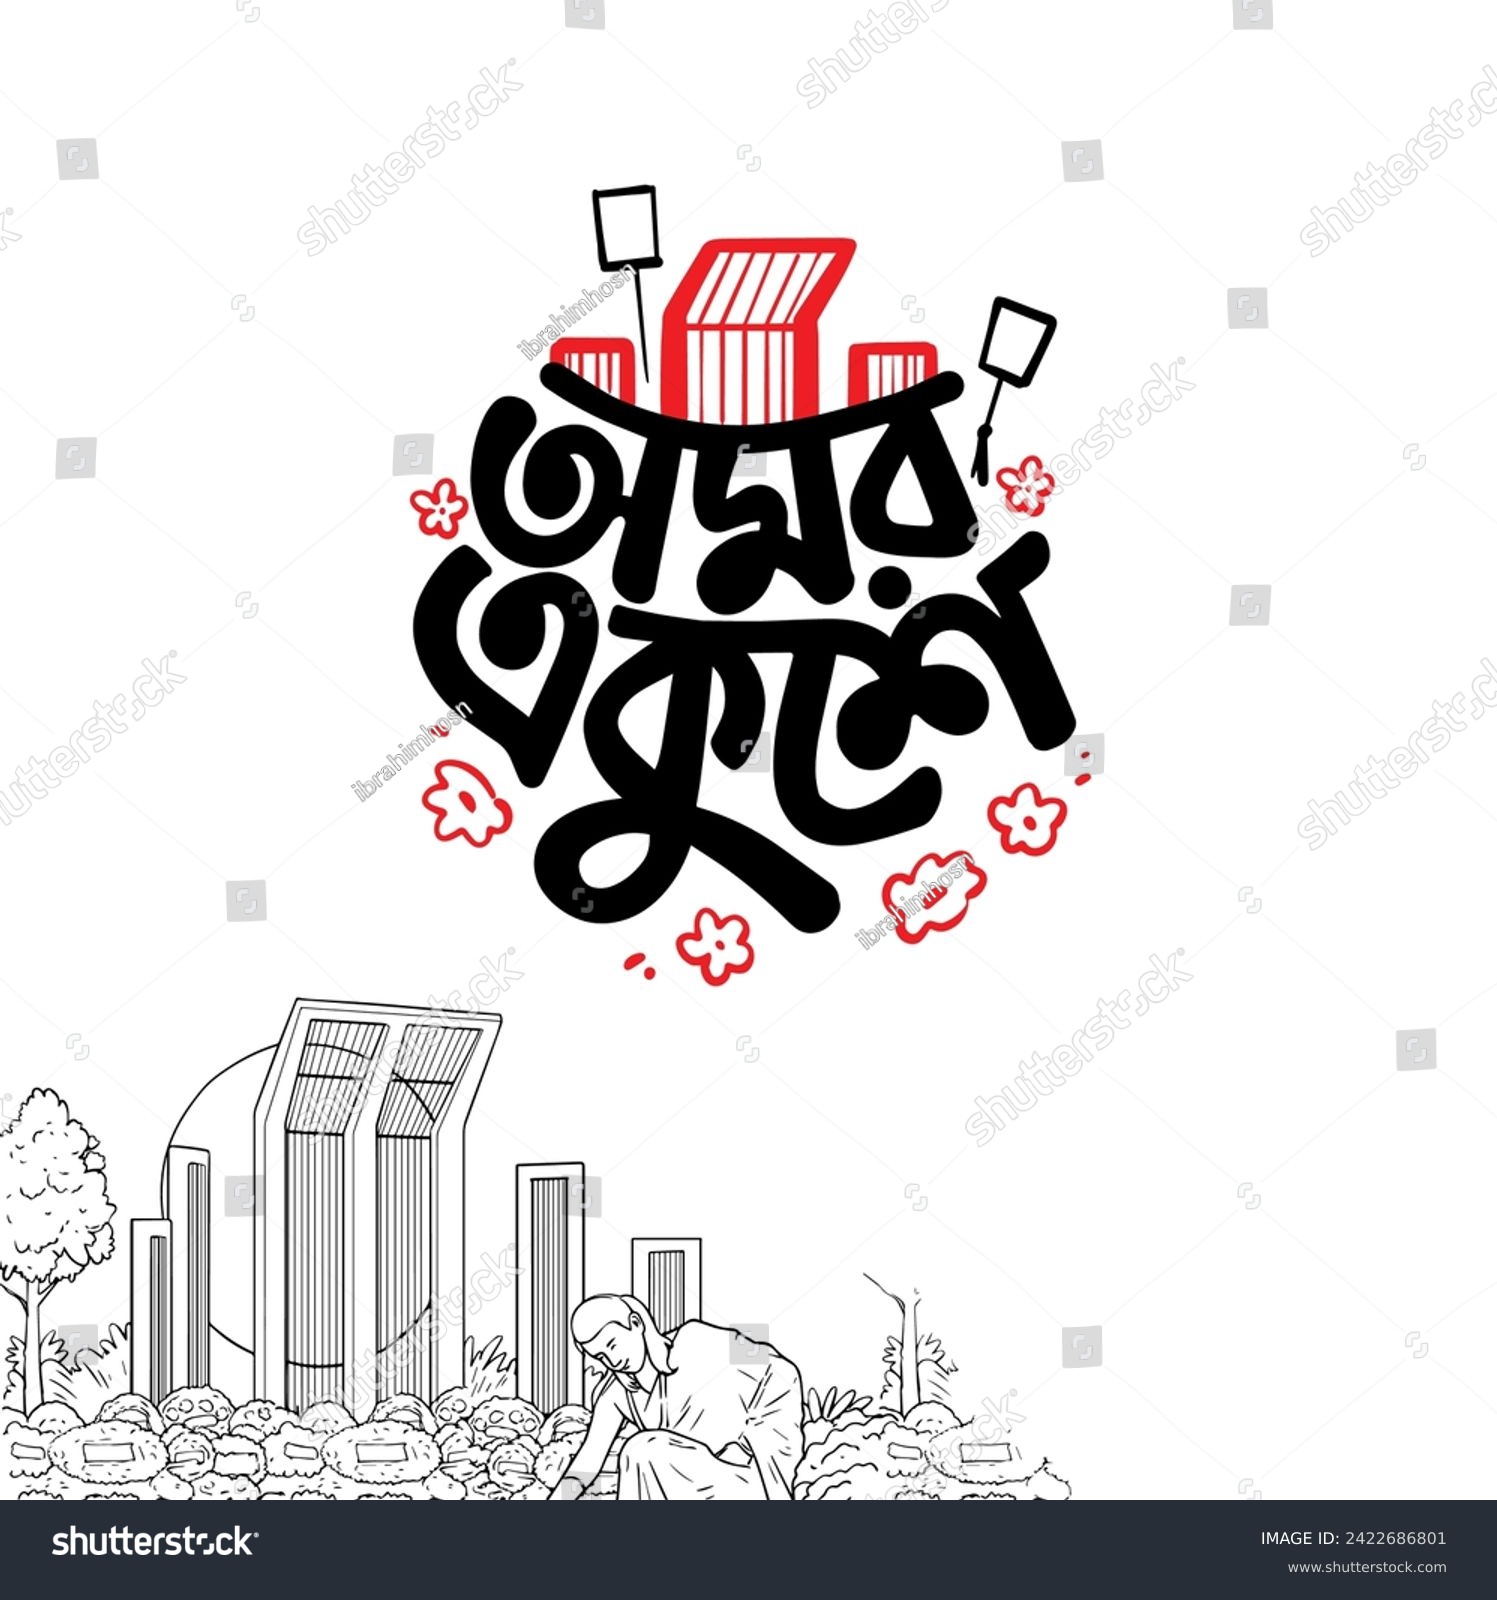 SVG of Bangla typography 21 e february with background illustration and social media post svg